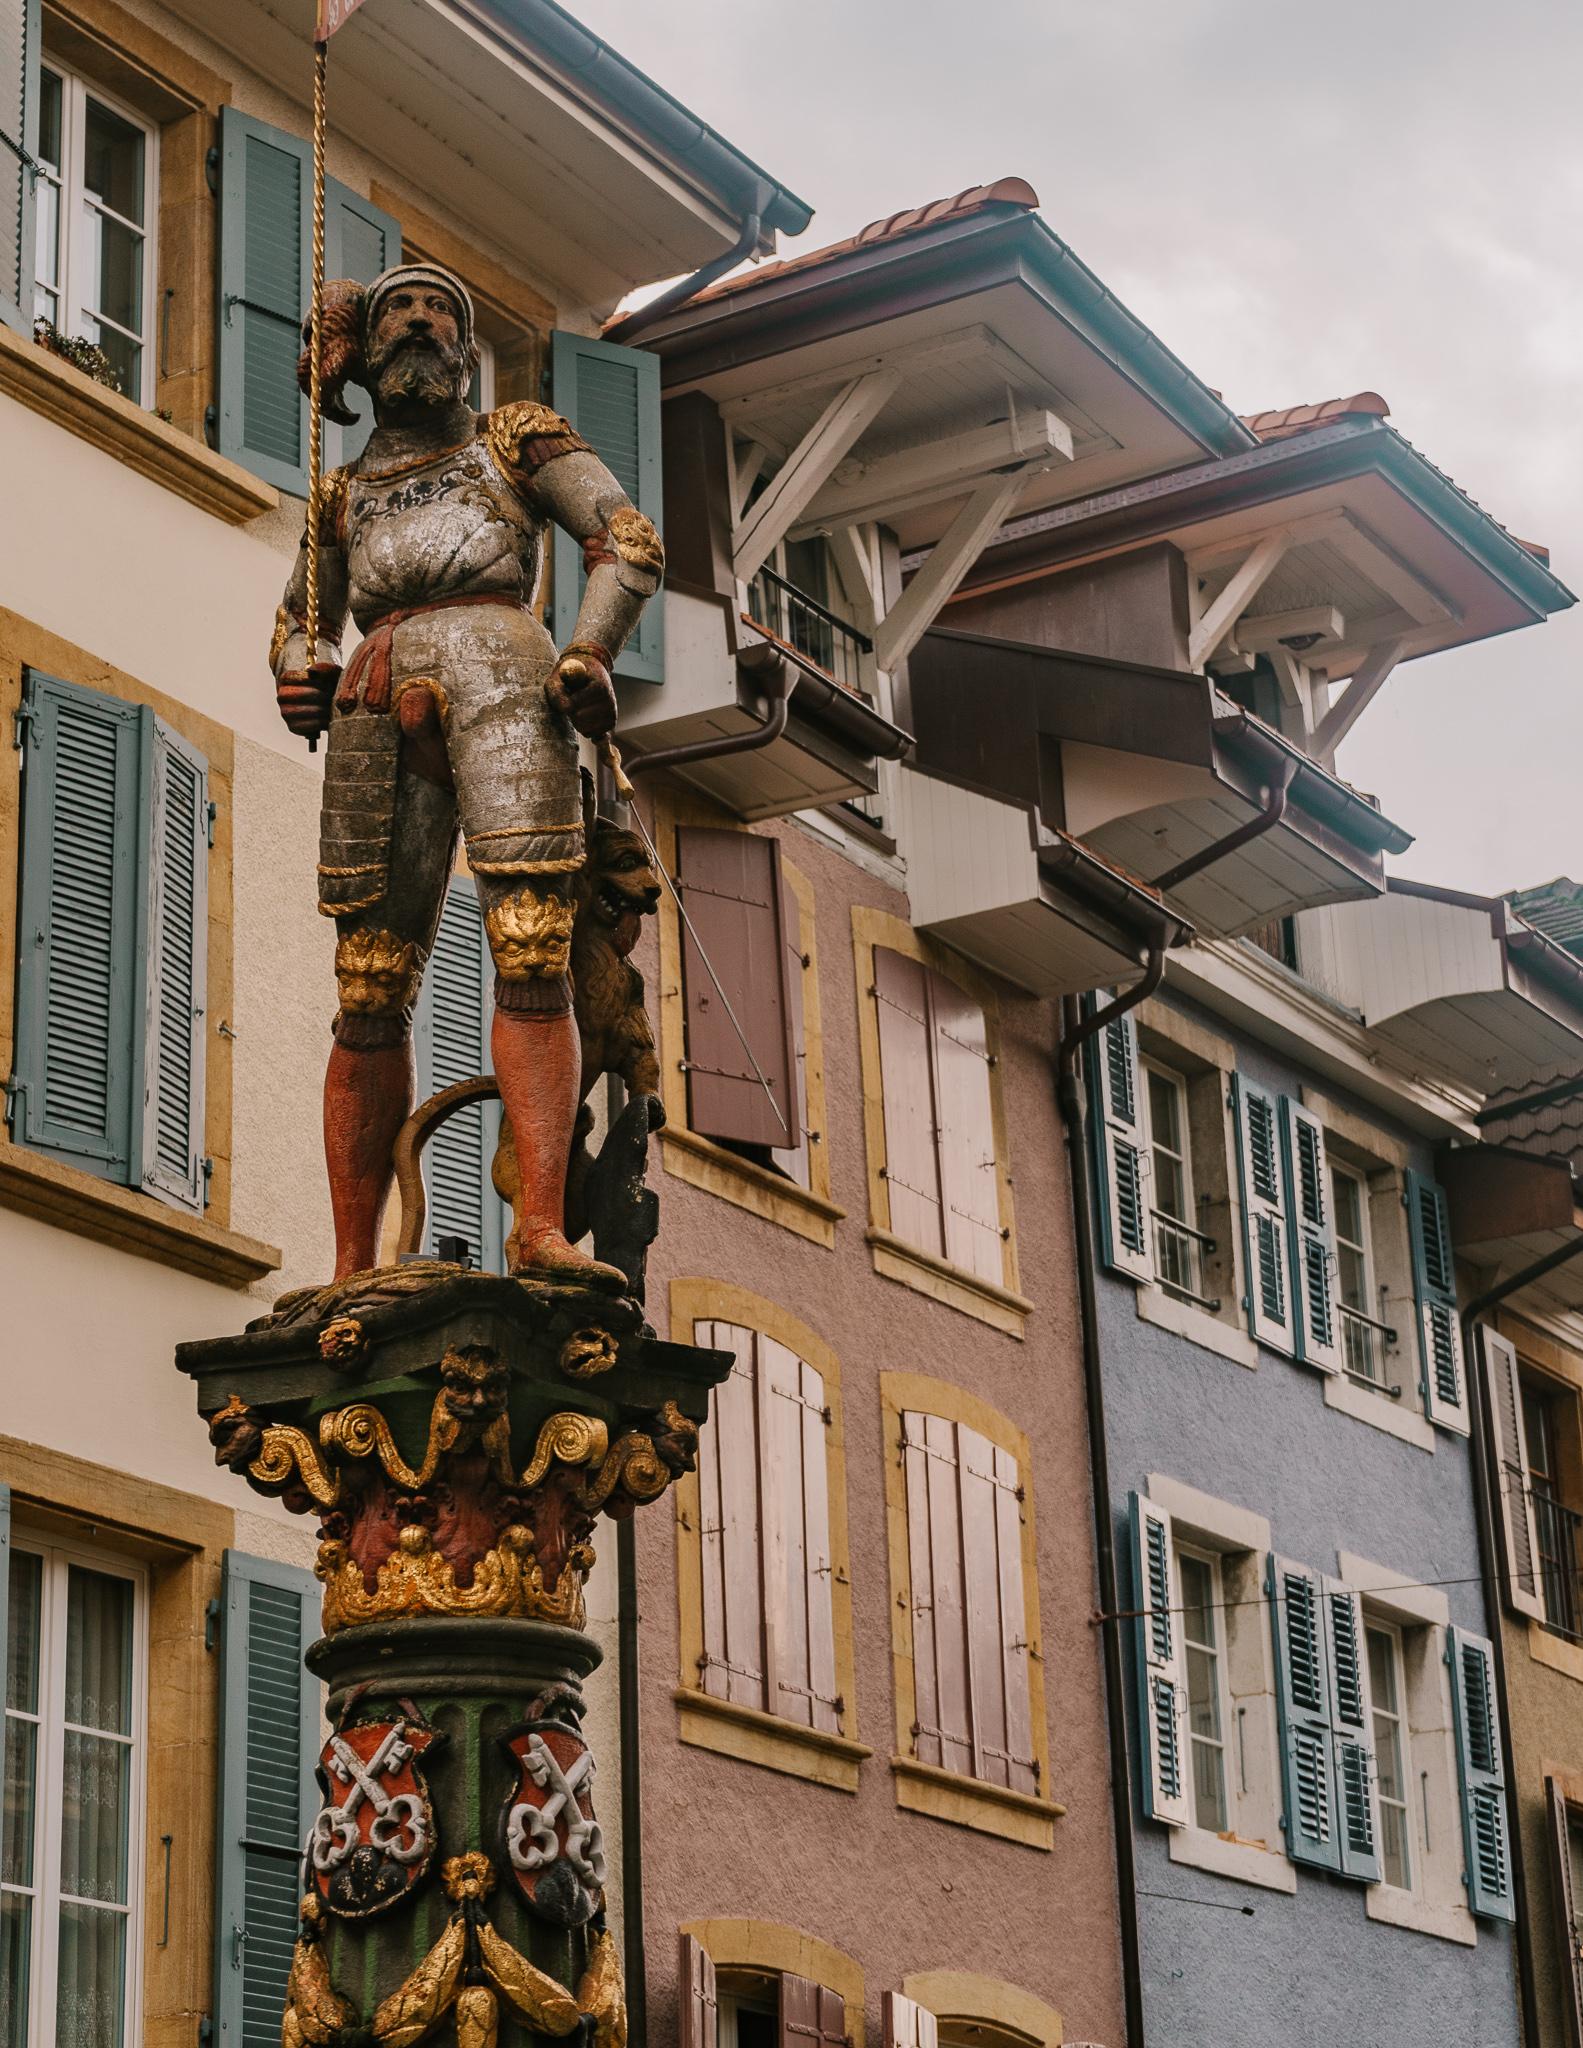 a painted statue on a tall wooden pole in the village of La Nueveville, Switzerland